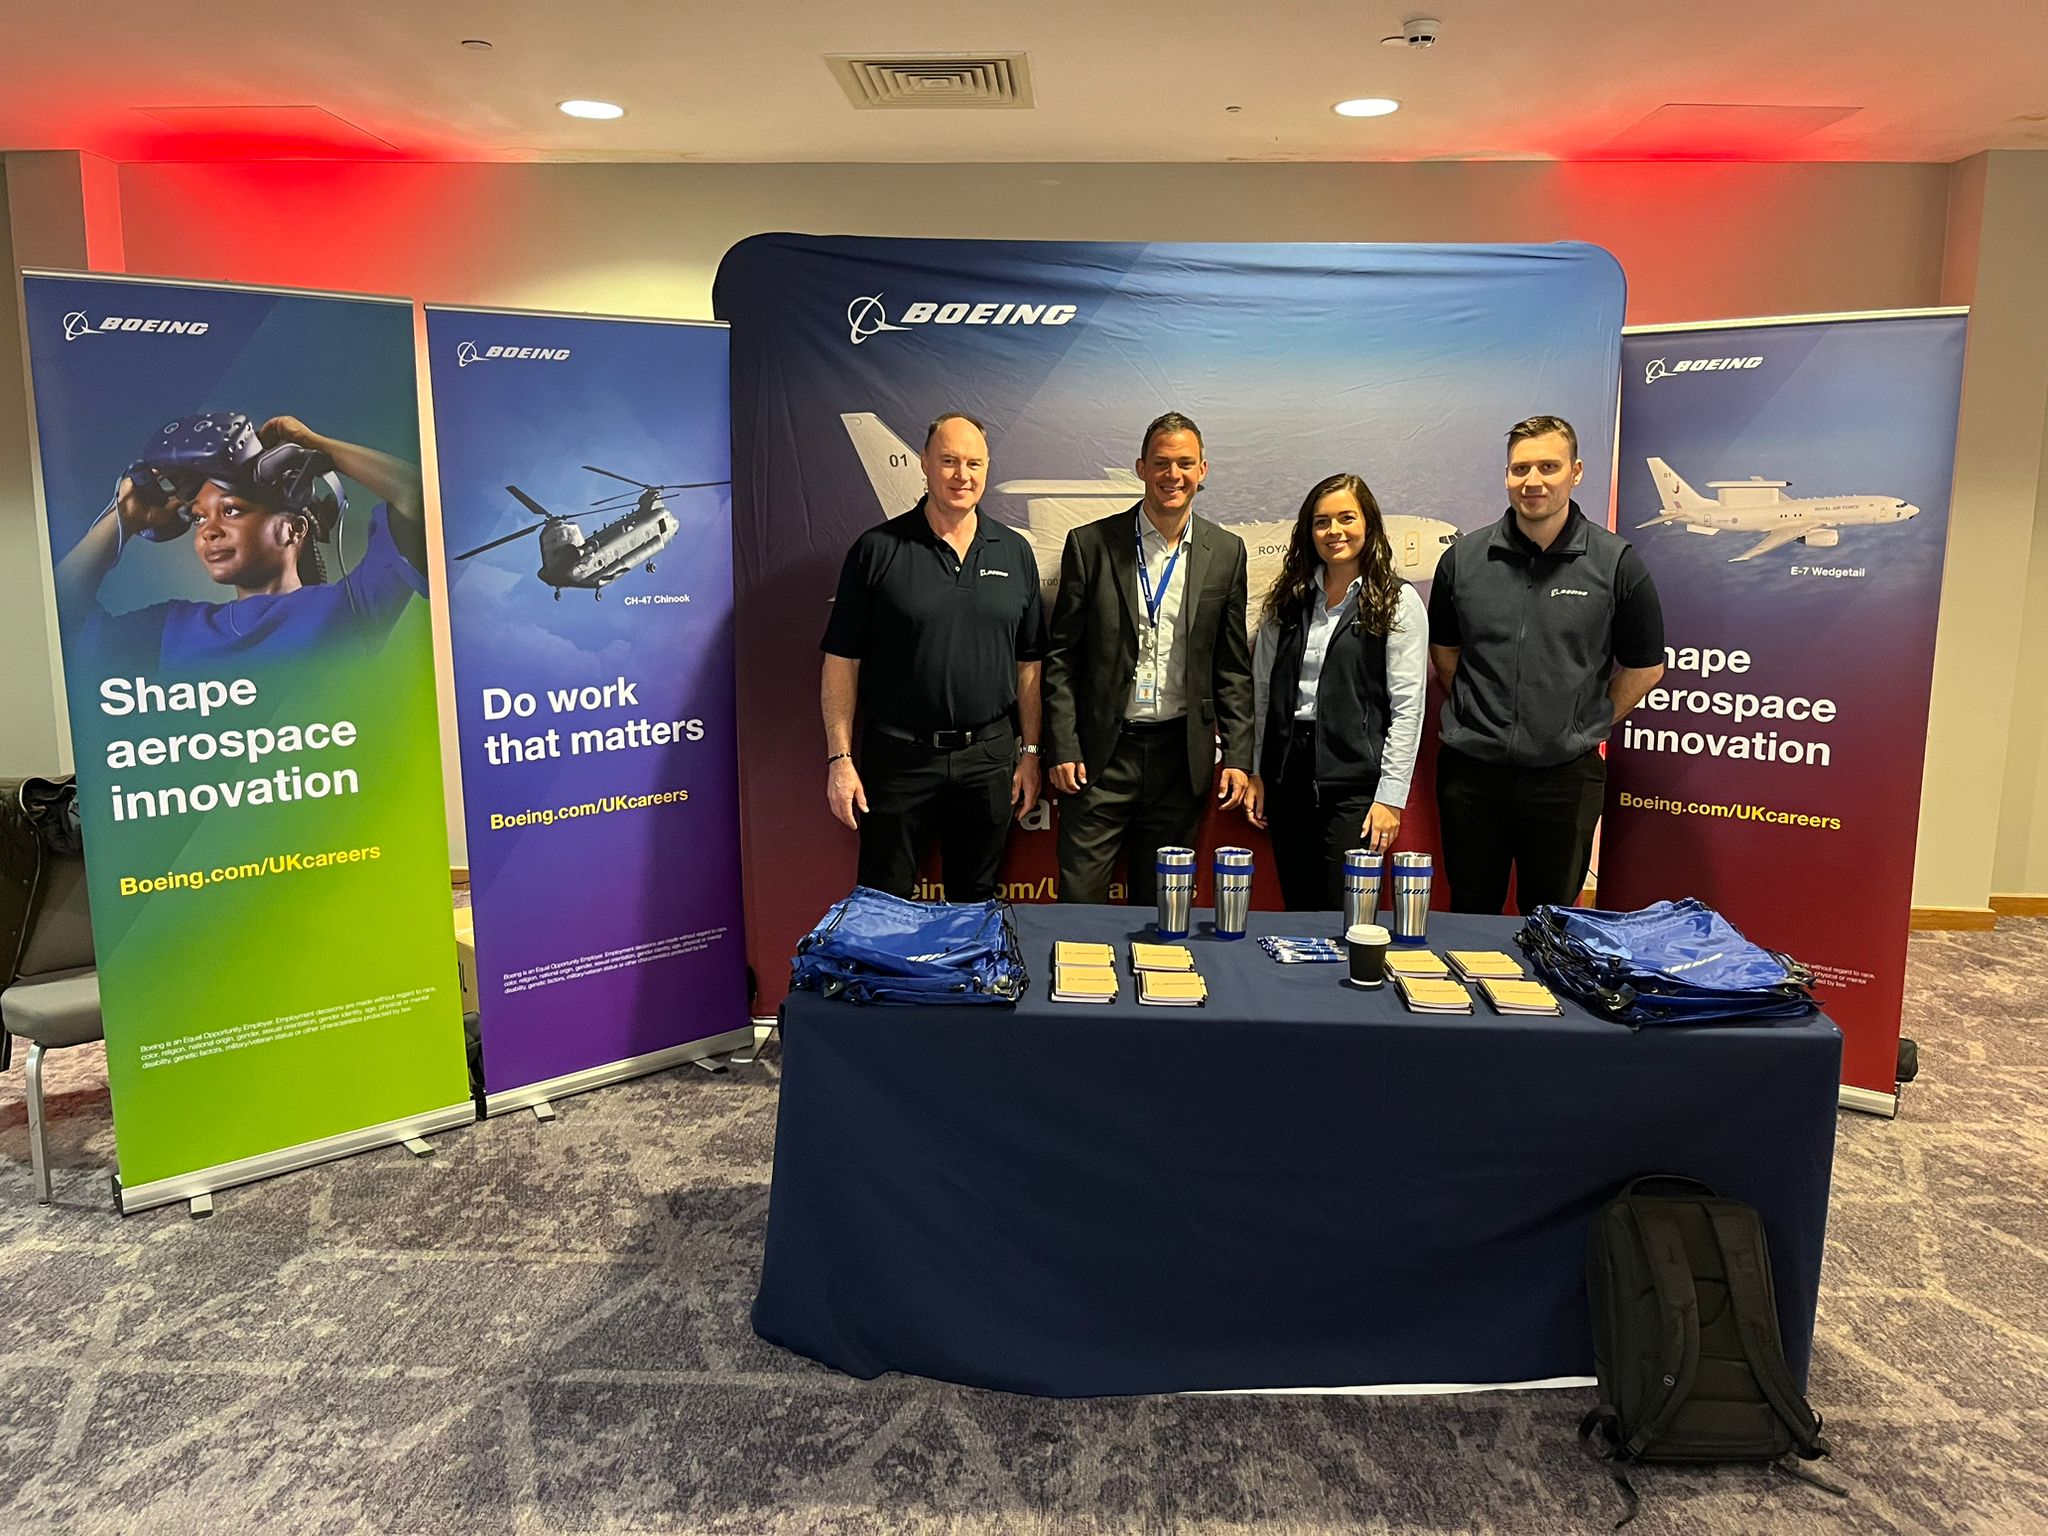 The Boeing Company at our event in Lincoln